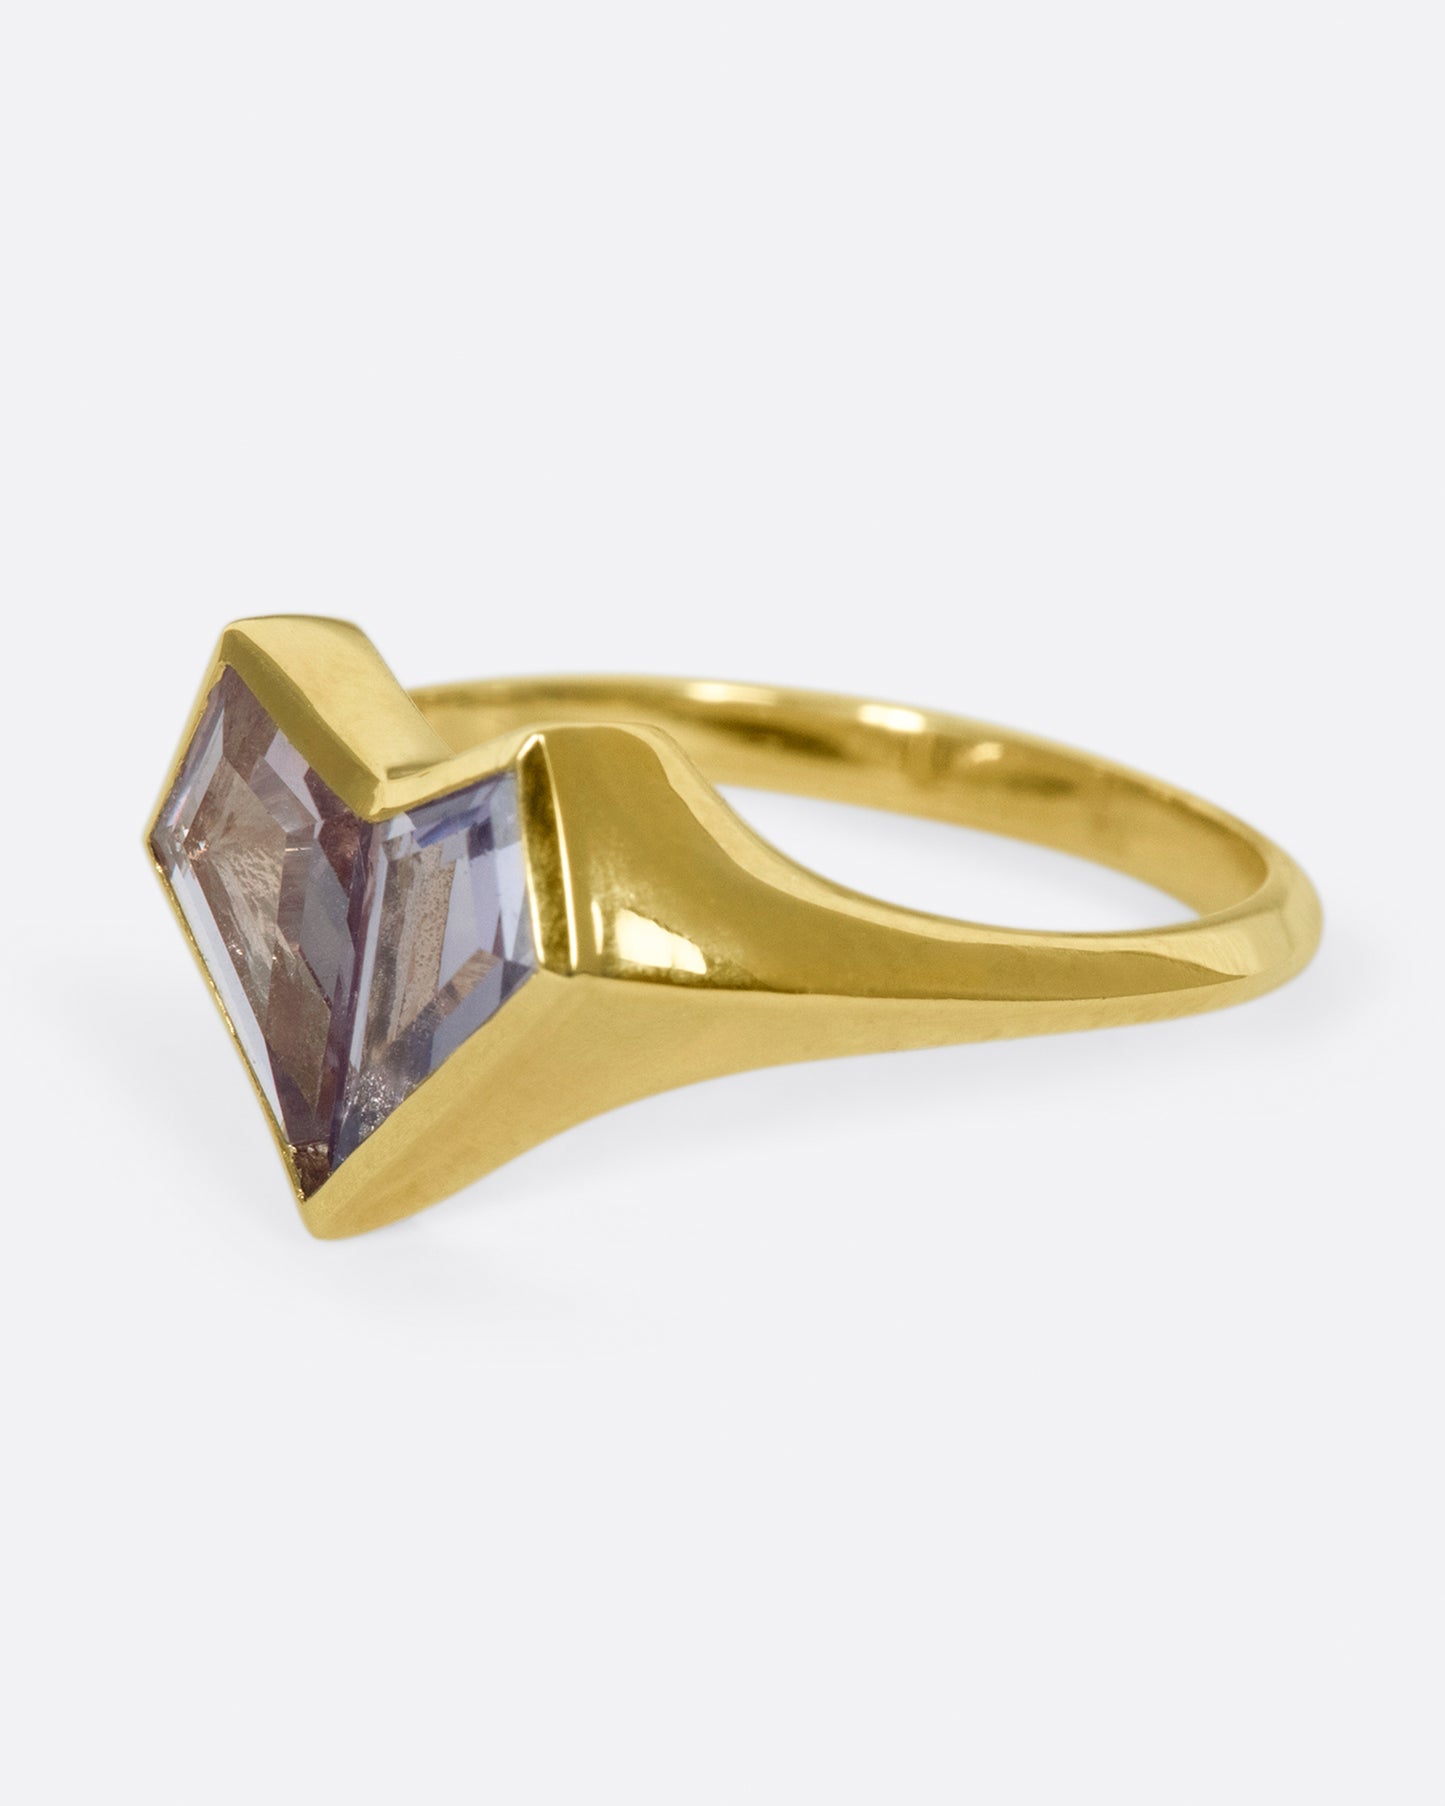 Two kite shaped sapphires; one pale pink and one purple; come together to form a heart on this signet ring.